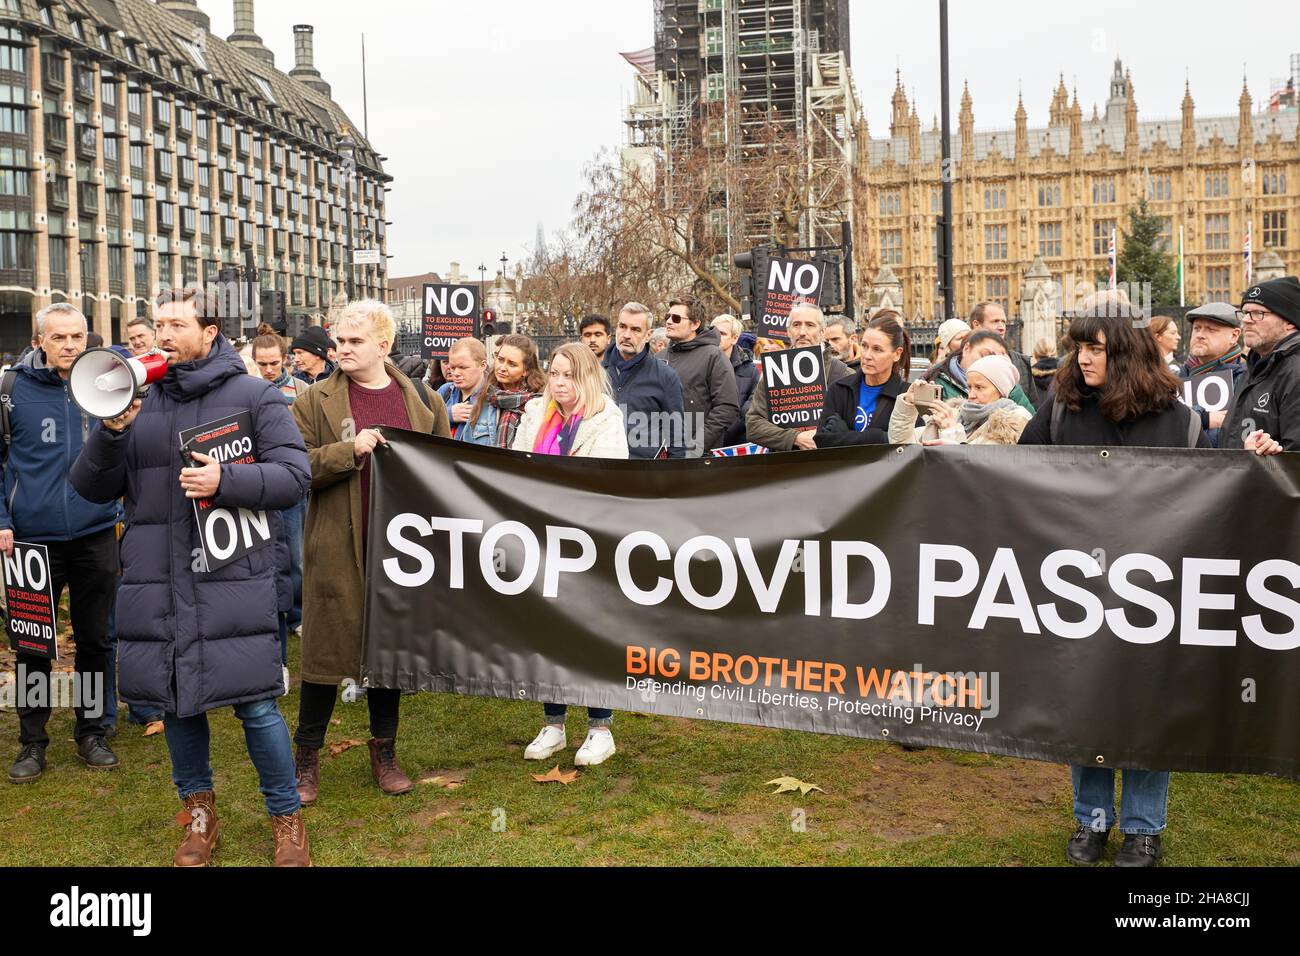 London, U.K. - 11 Dec 2021: Publican and campaigner Adam Brooks, speaking at a Stop Covid Passes protest in Westminster.Publican Stock Photo